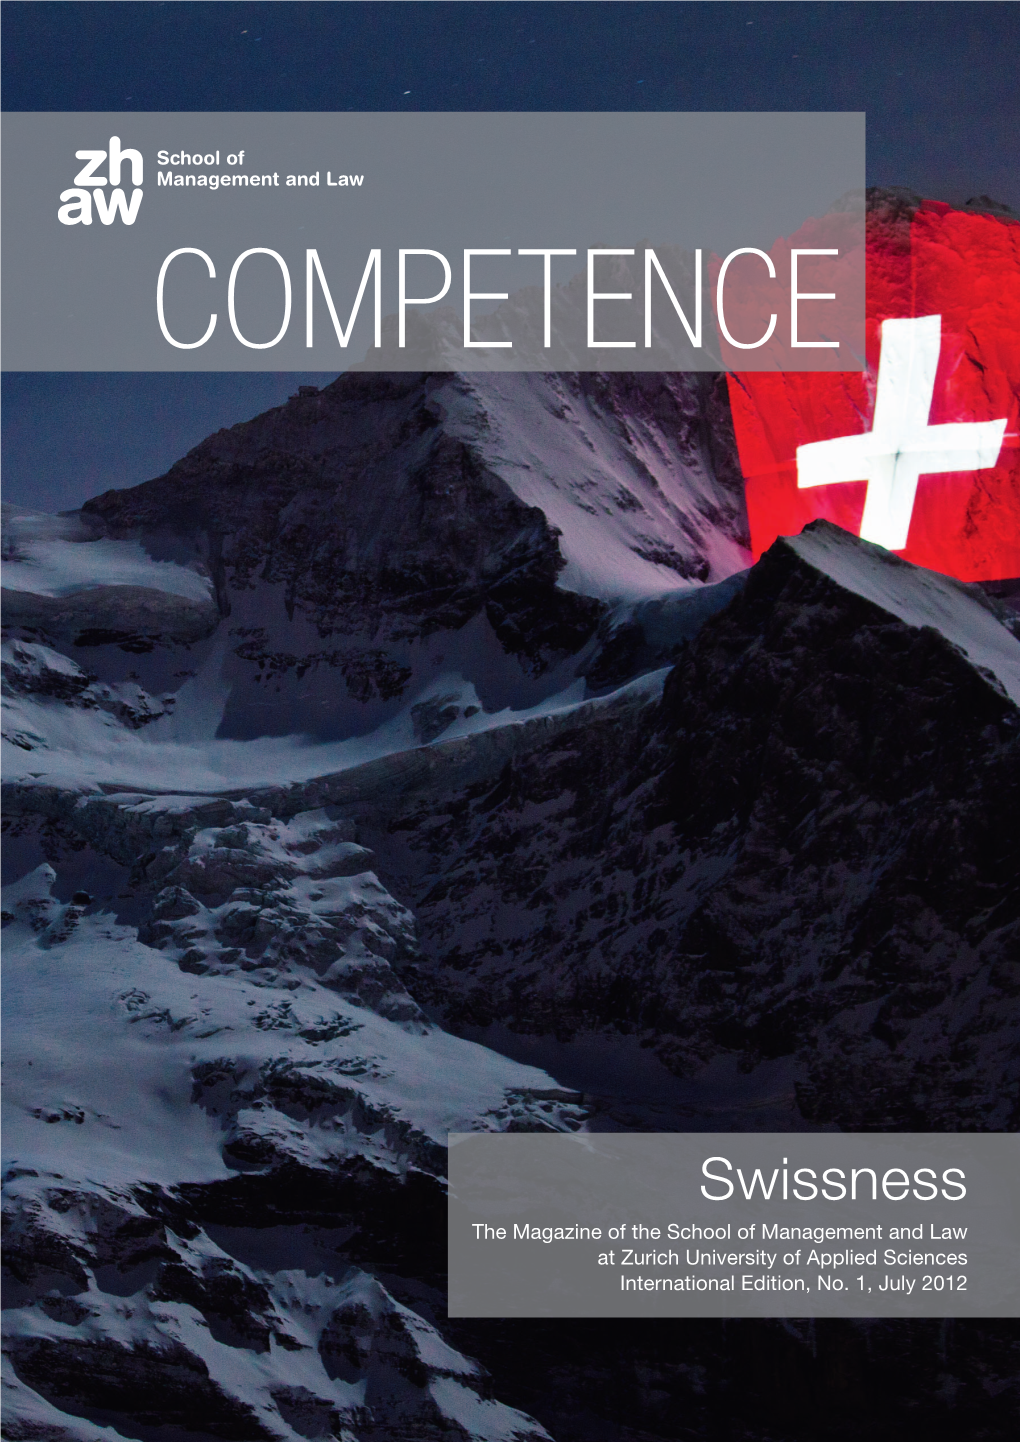 Swissness the Magazine of the School of Management and Law at Zurich University of Applied Sciences International Edition, No